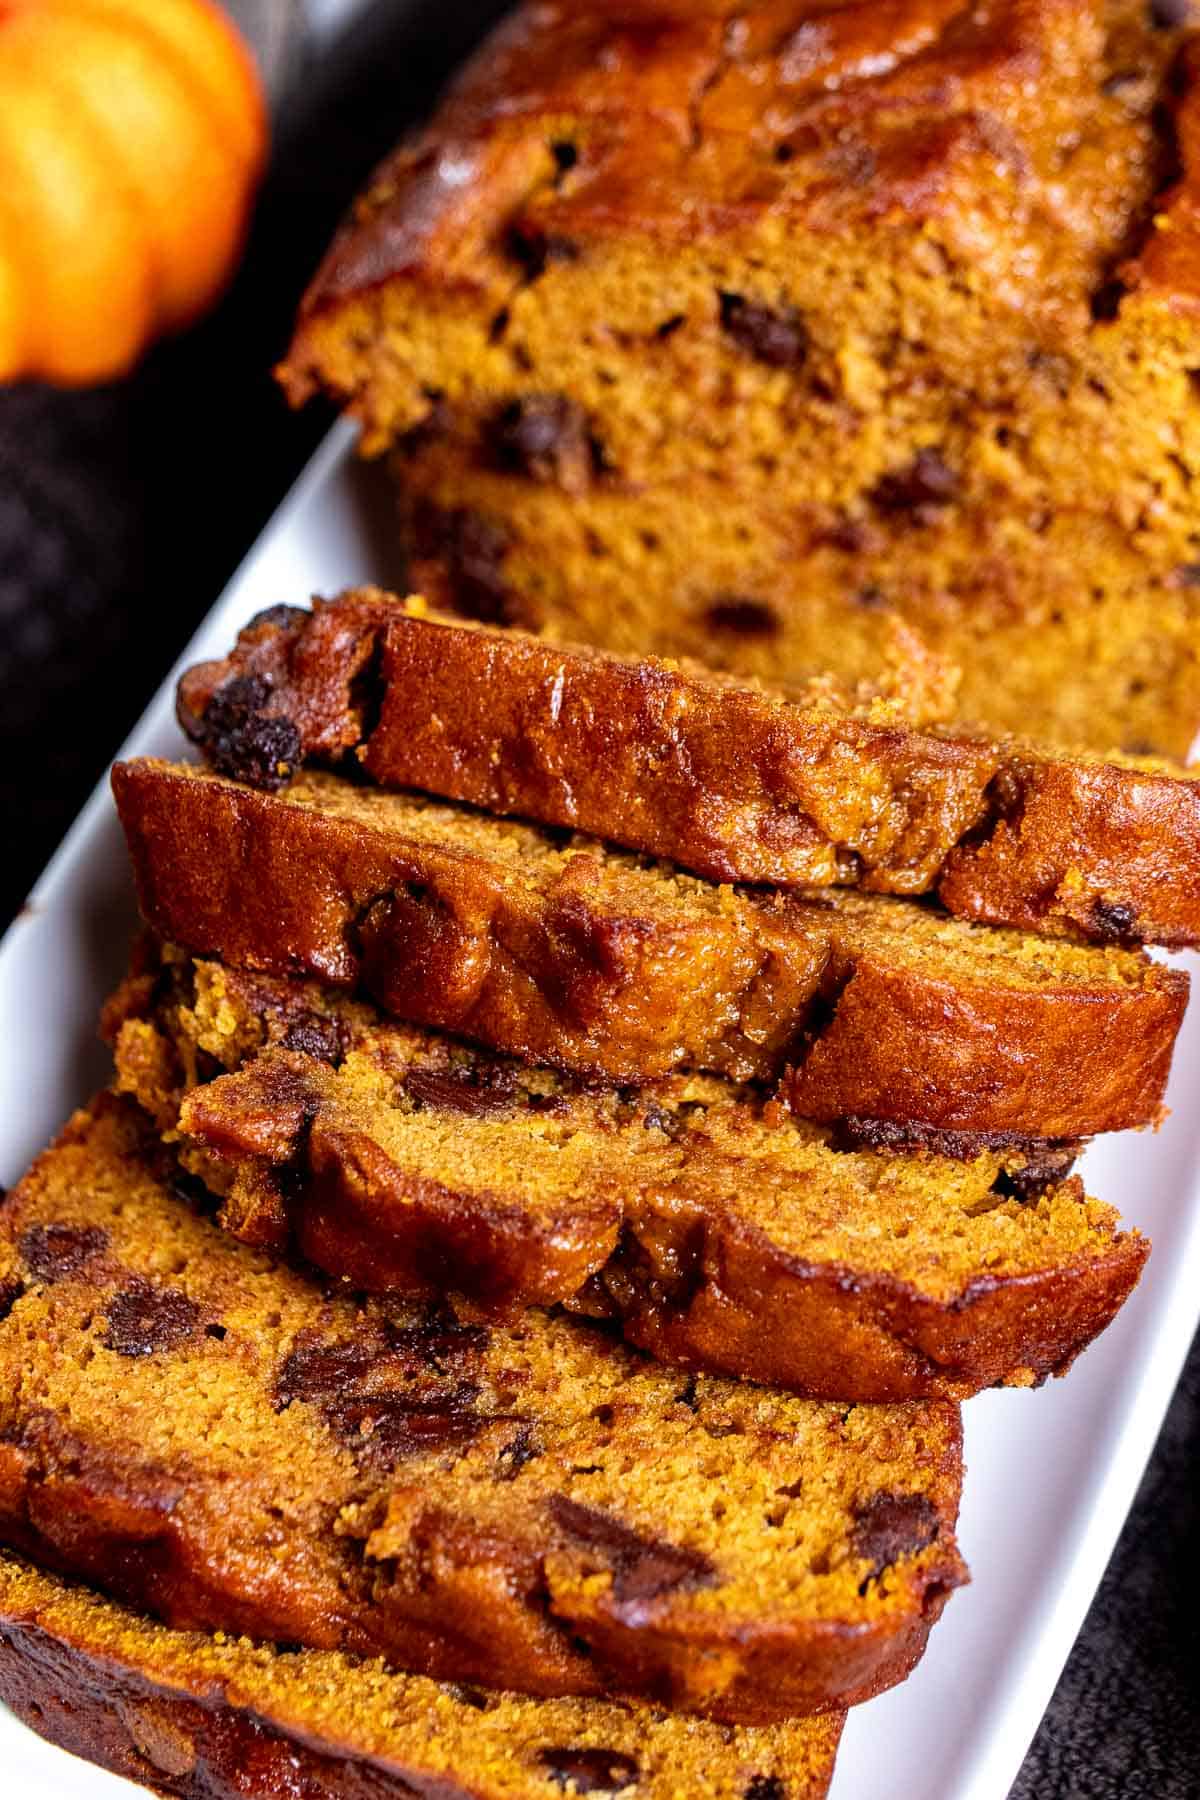 Angled view of sliced chocolate chip pumpkin bread on a white plate.